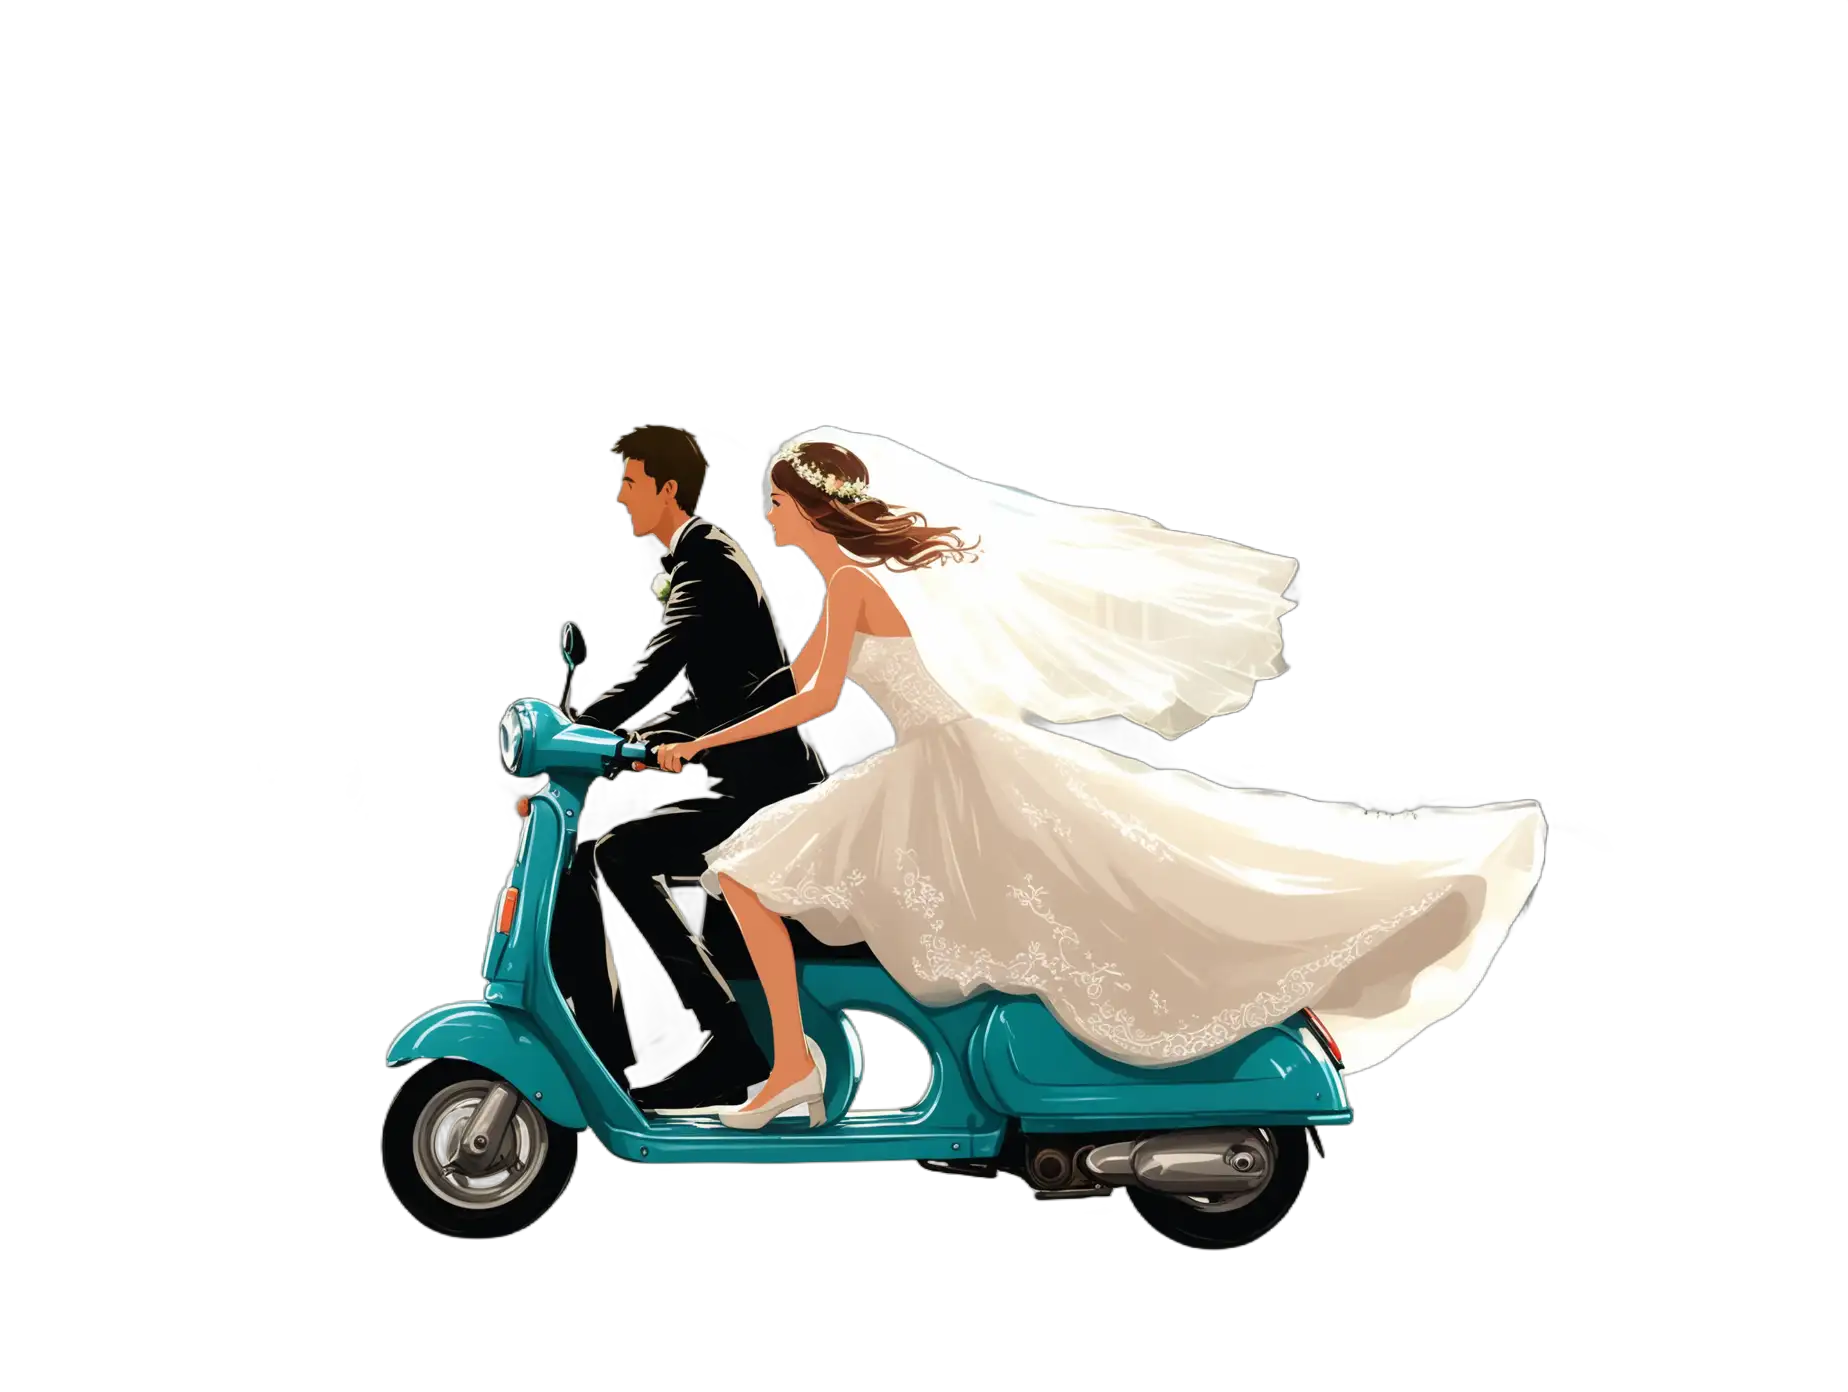 Sunlit-City-Scooter-Wedding-Joyful-Ride-by-a-Bride-and-Groom